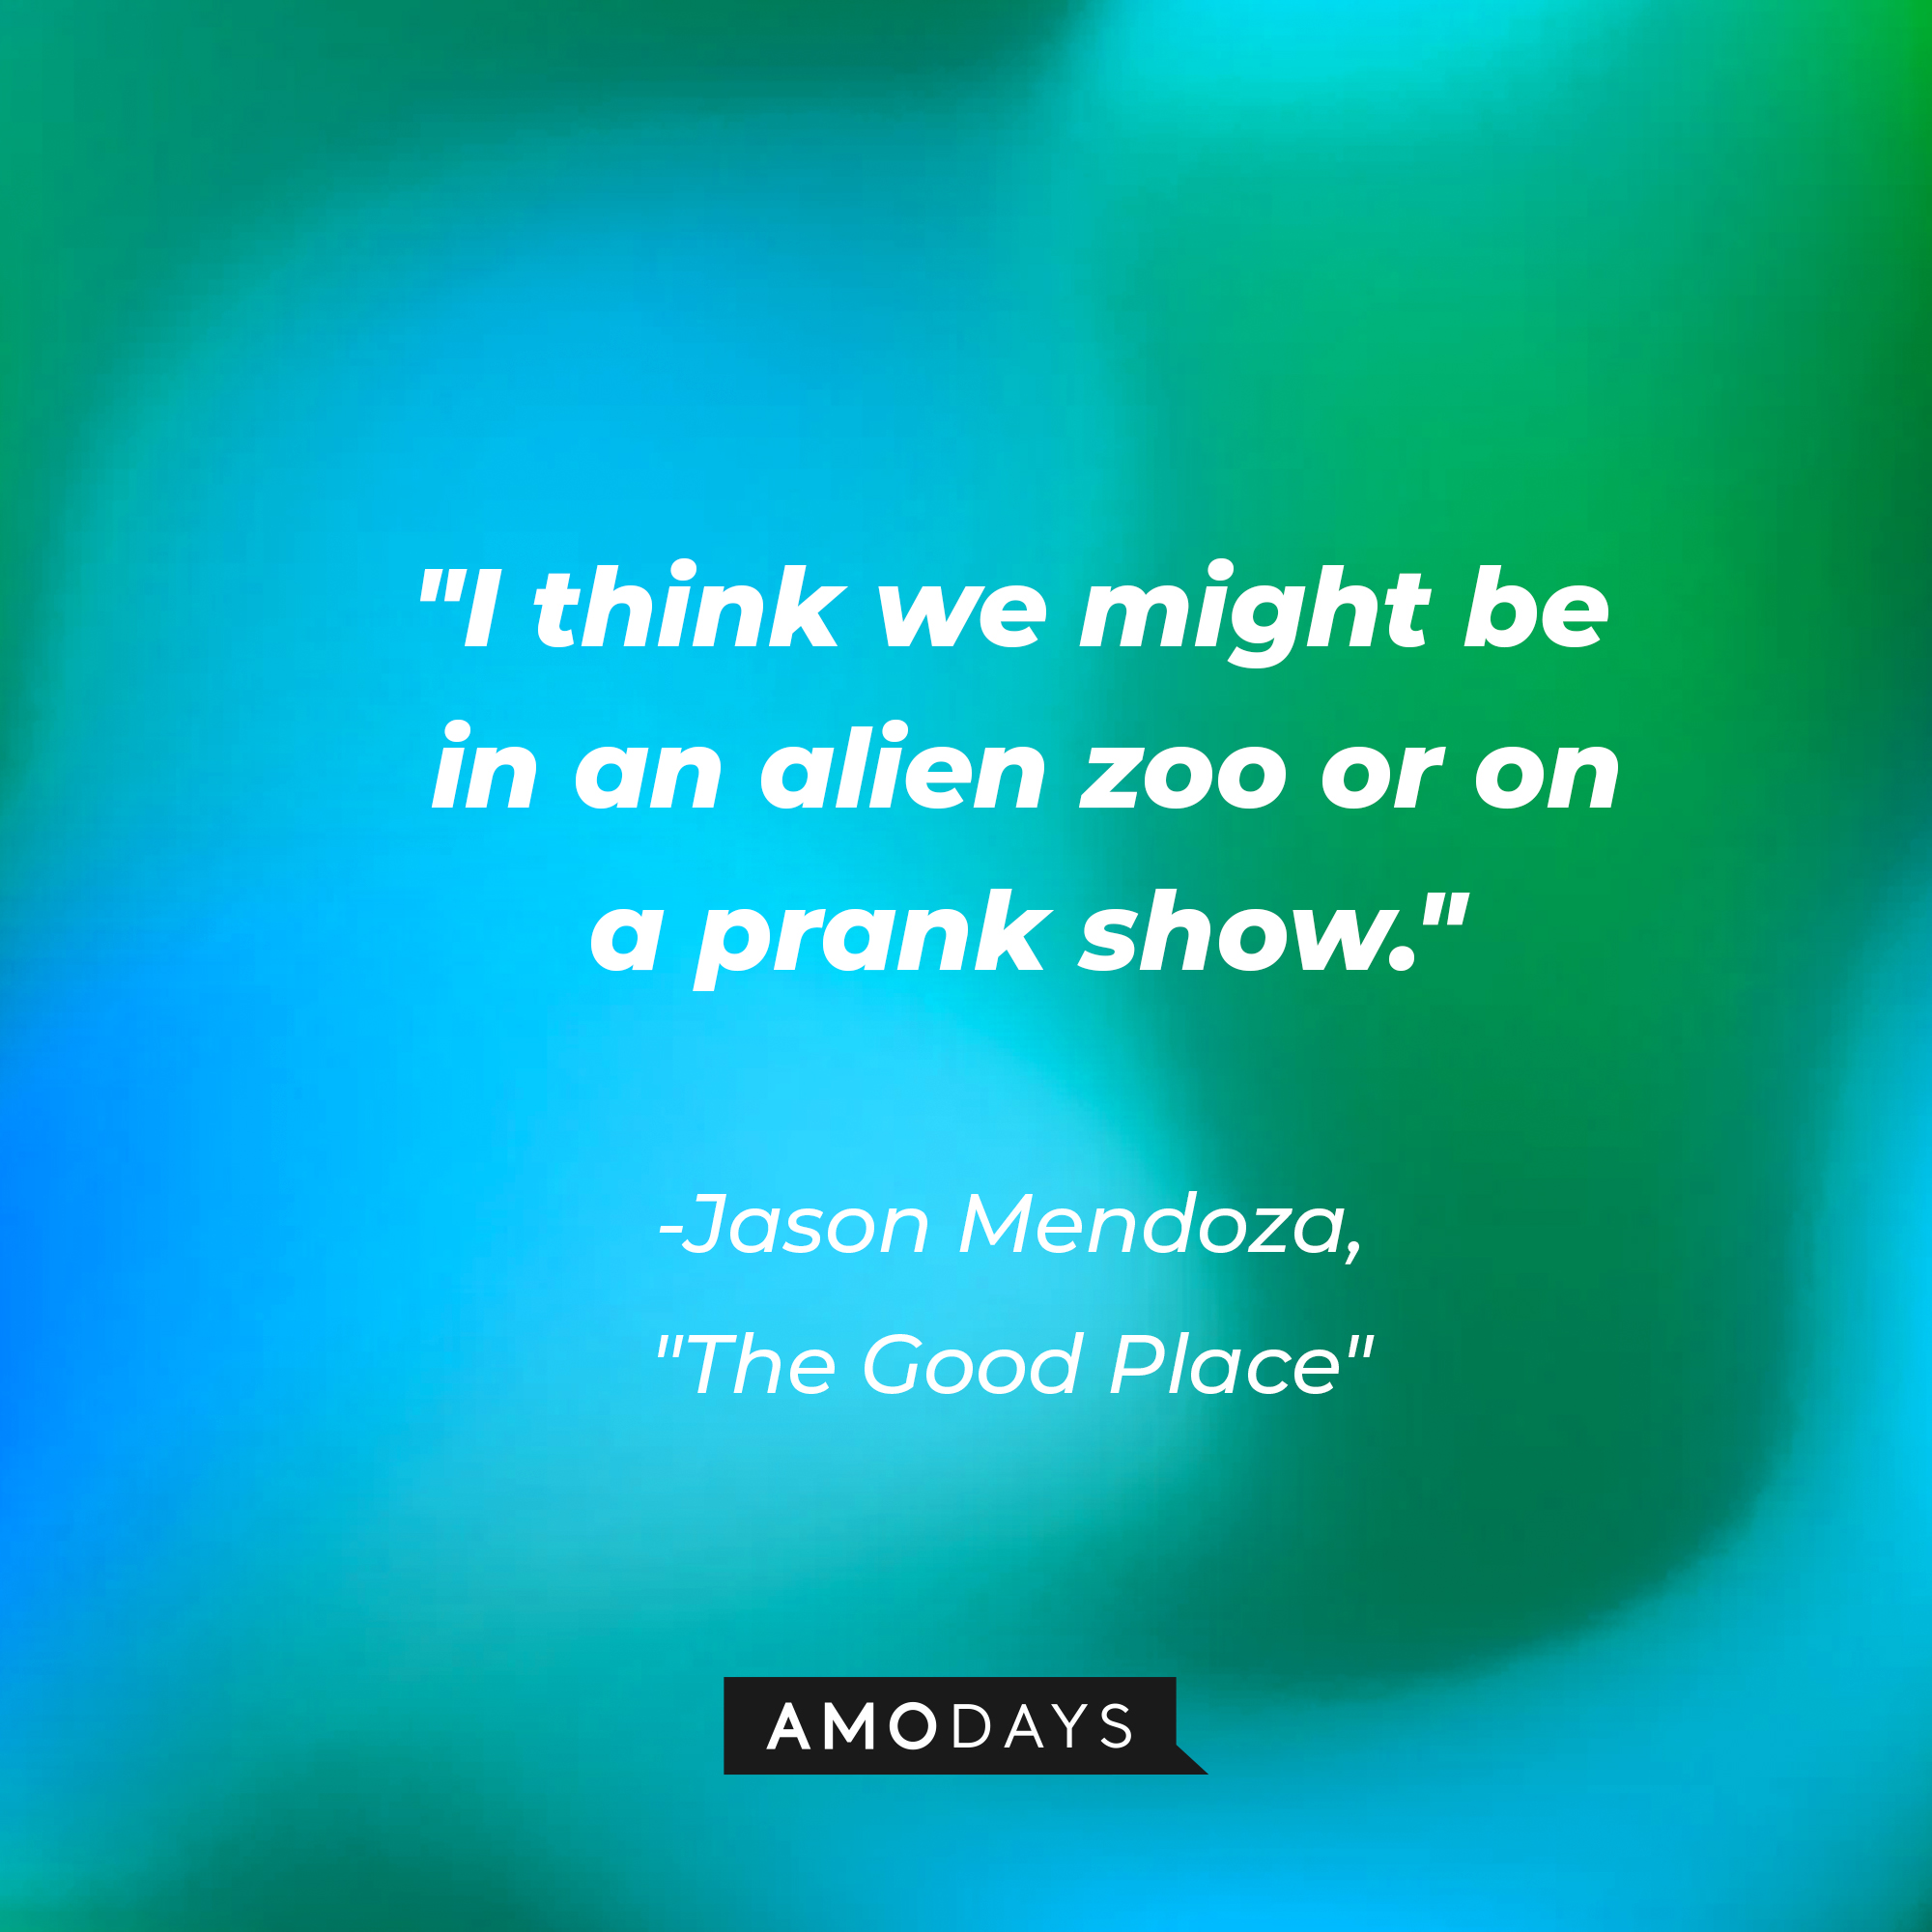 Jason Mendoza's quote in "The Good Place:" “I think we might be in an alien zoo or on a prank show.” | Source: Amodays